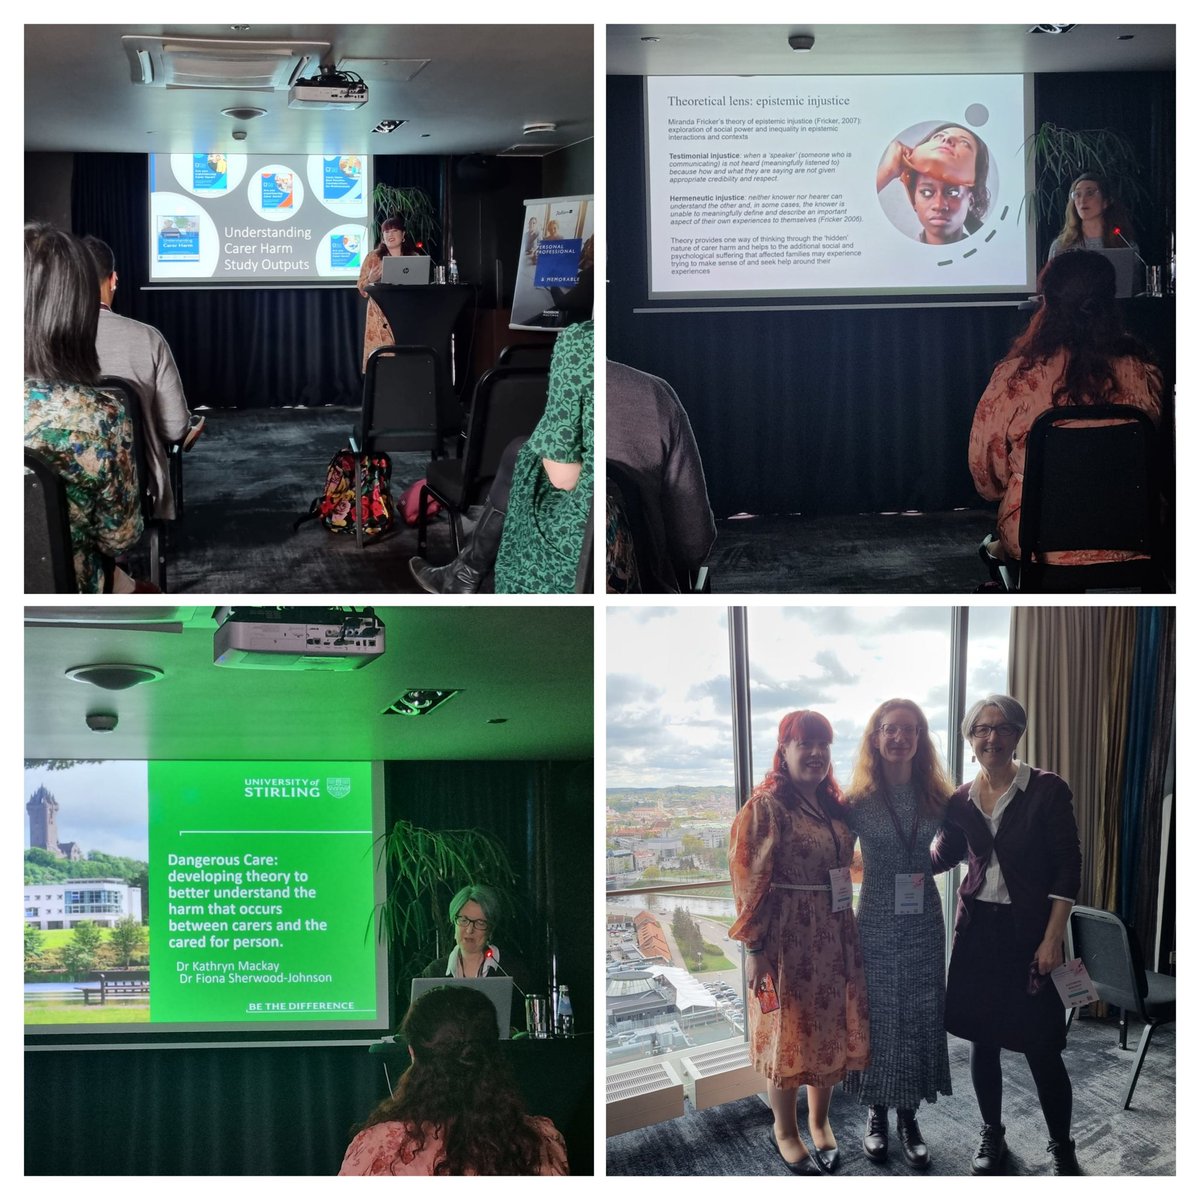 Huge thanks to everyone who attended our Hidden Harm Symposium this morning! Fantastic discussions and I feel like we have ( literally) taken our thinking to new heights #ecswr24 #SkybarRoom #22ndfloor @UCDSocialPWJ @KaspMackay